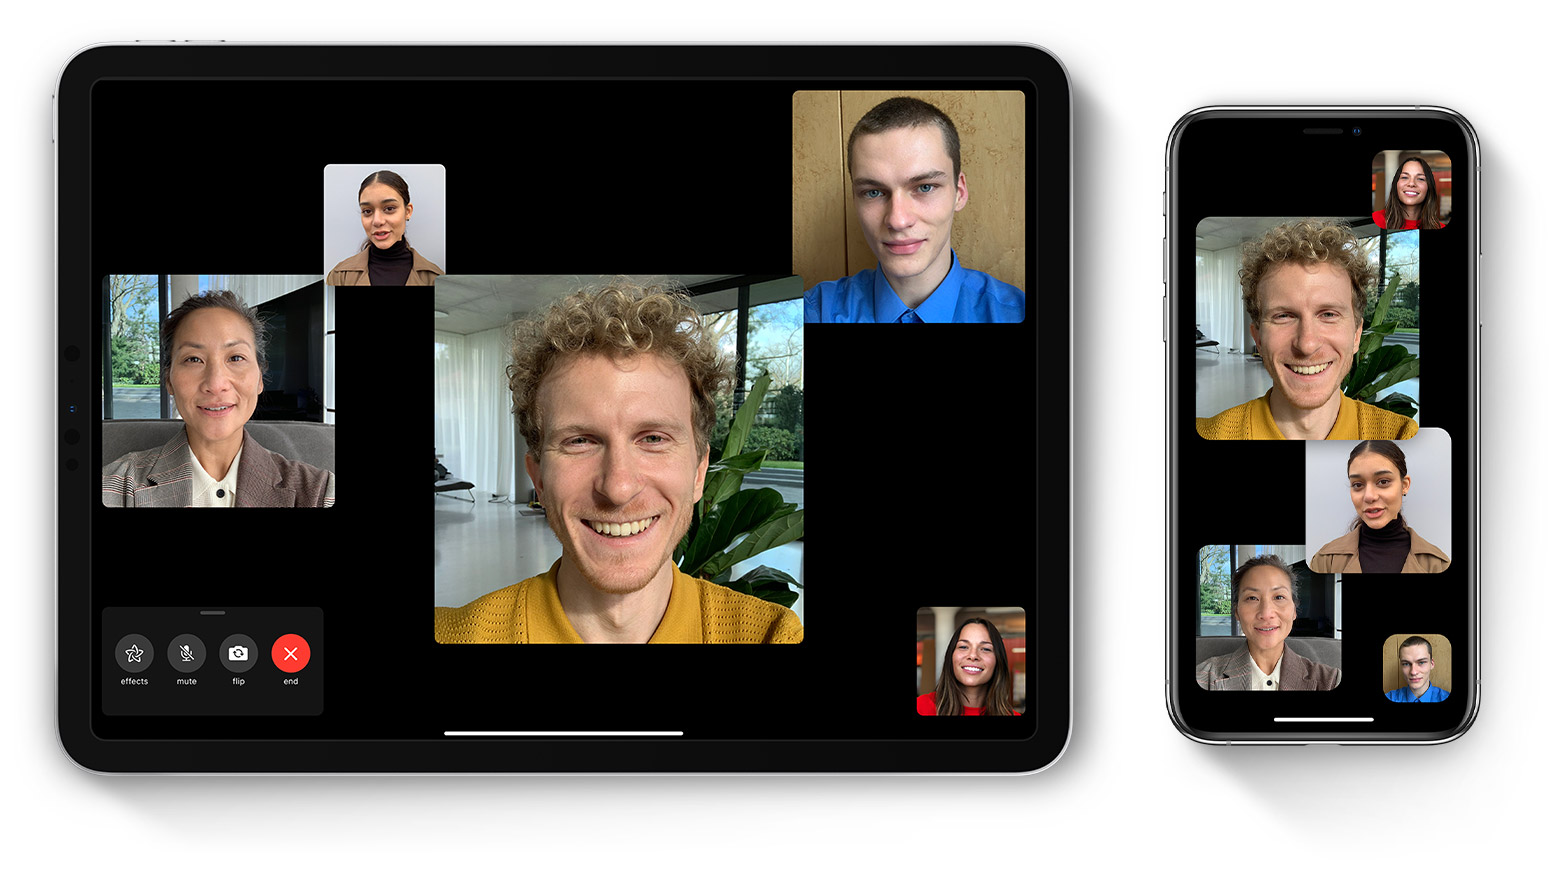 Group FaceTime Not Working on iPhone? Here’s How to Troubleshoot & Fix